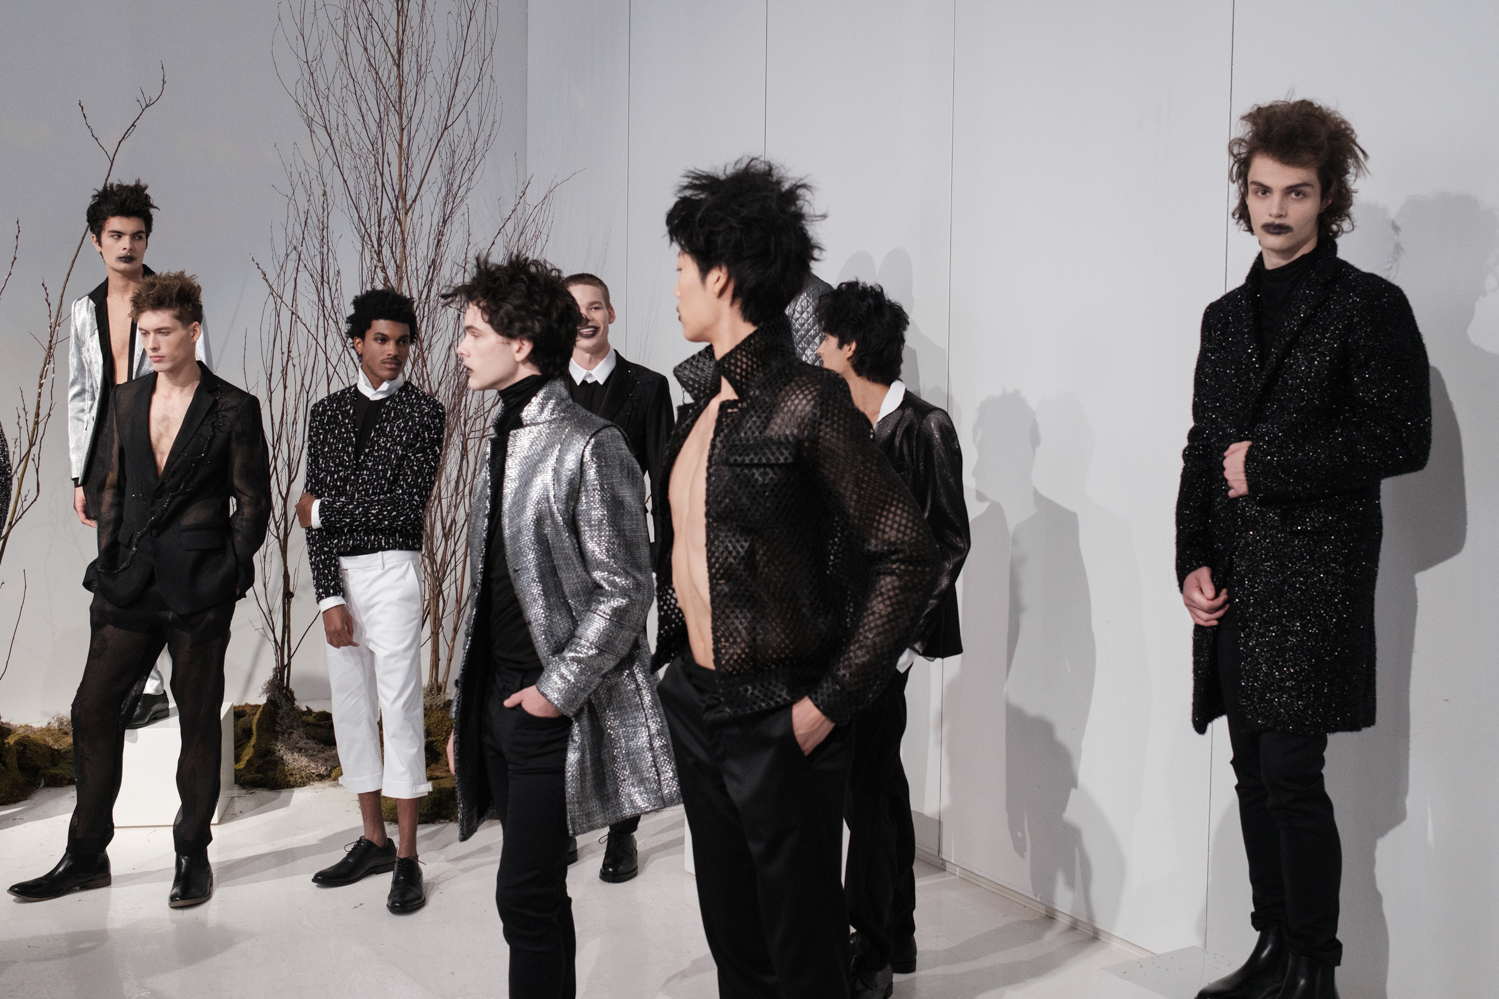 A group of nine models wear various black, white and silver outfits. In the background are leafless, brown trees.